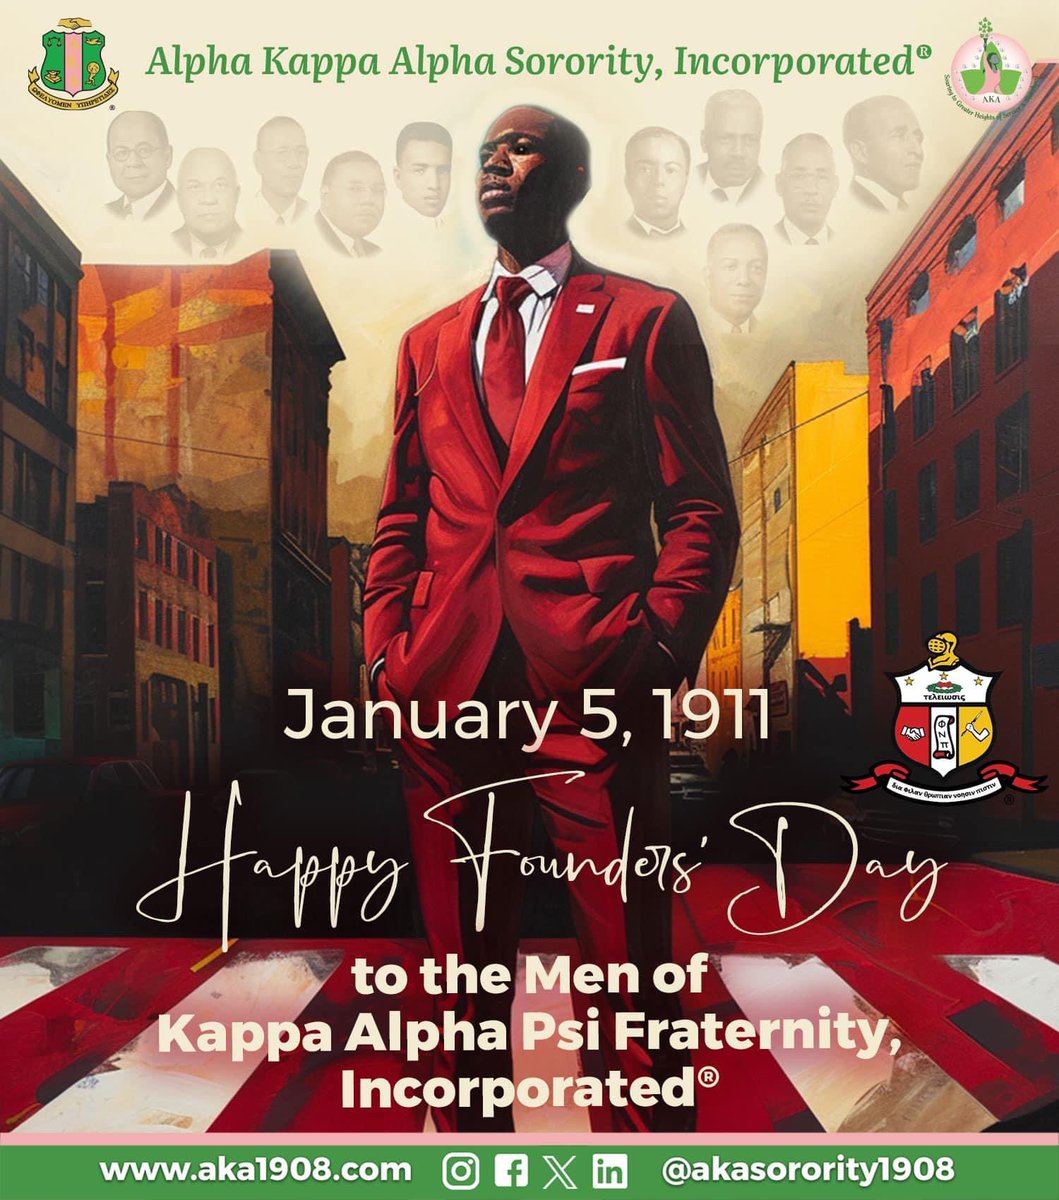 YOOOO!!!!! ♥️💎♦️

Happy Founders' Day to the Men of Kappa Alpha Psi Fraternity, Incorporated®! Congratulations on 113 years of excellence and honorable achievement in every field of human endeavor. #KappaAlphaPsi #AKA1908🩷💚♦️💎